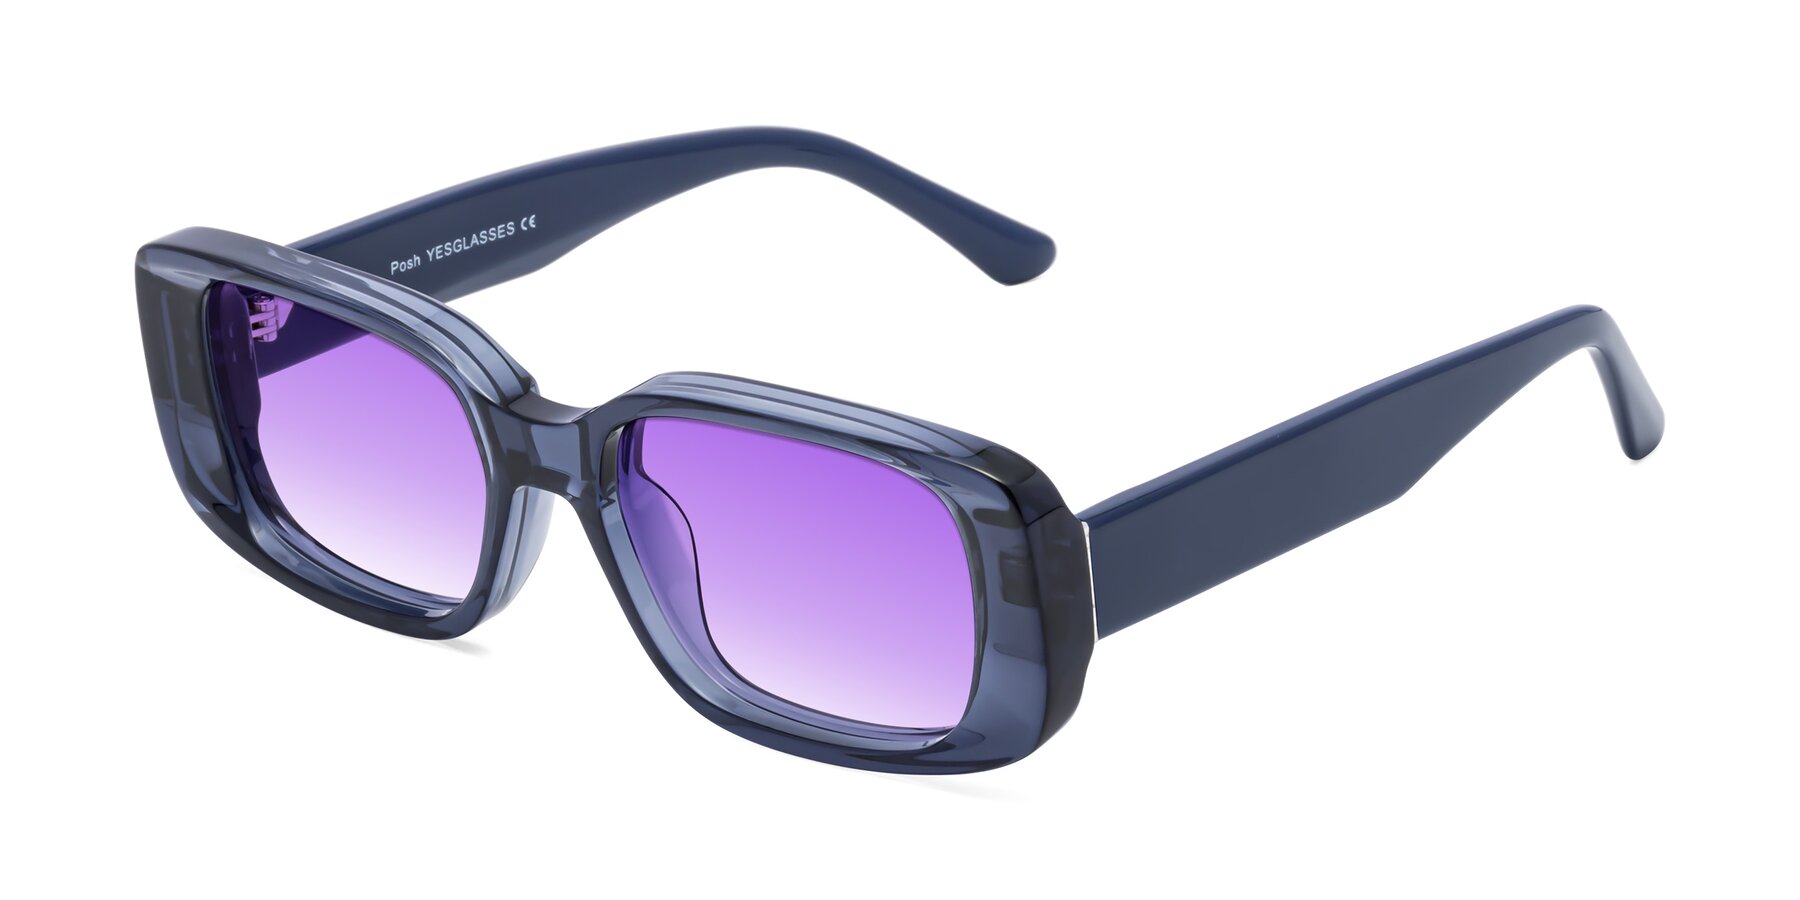 Angle of Posh in Translucent Blue with Purple Gradient Lenses